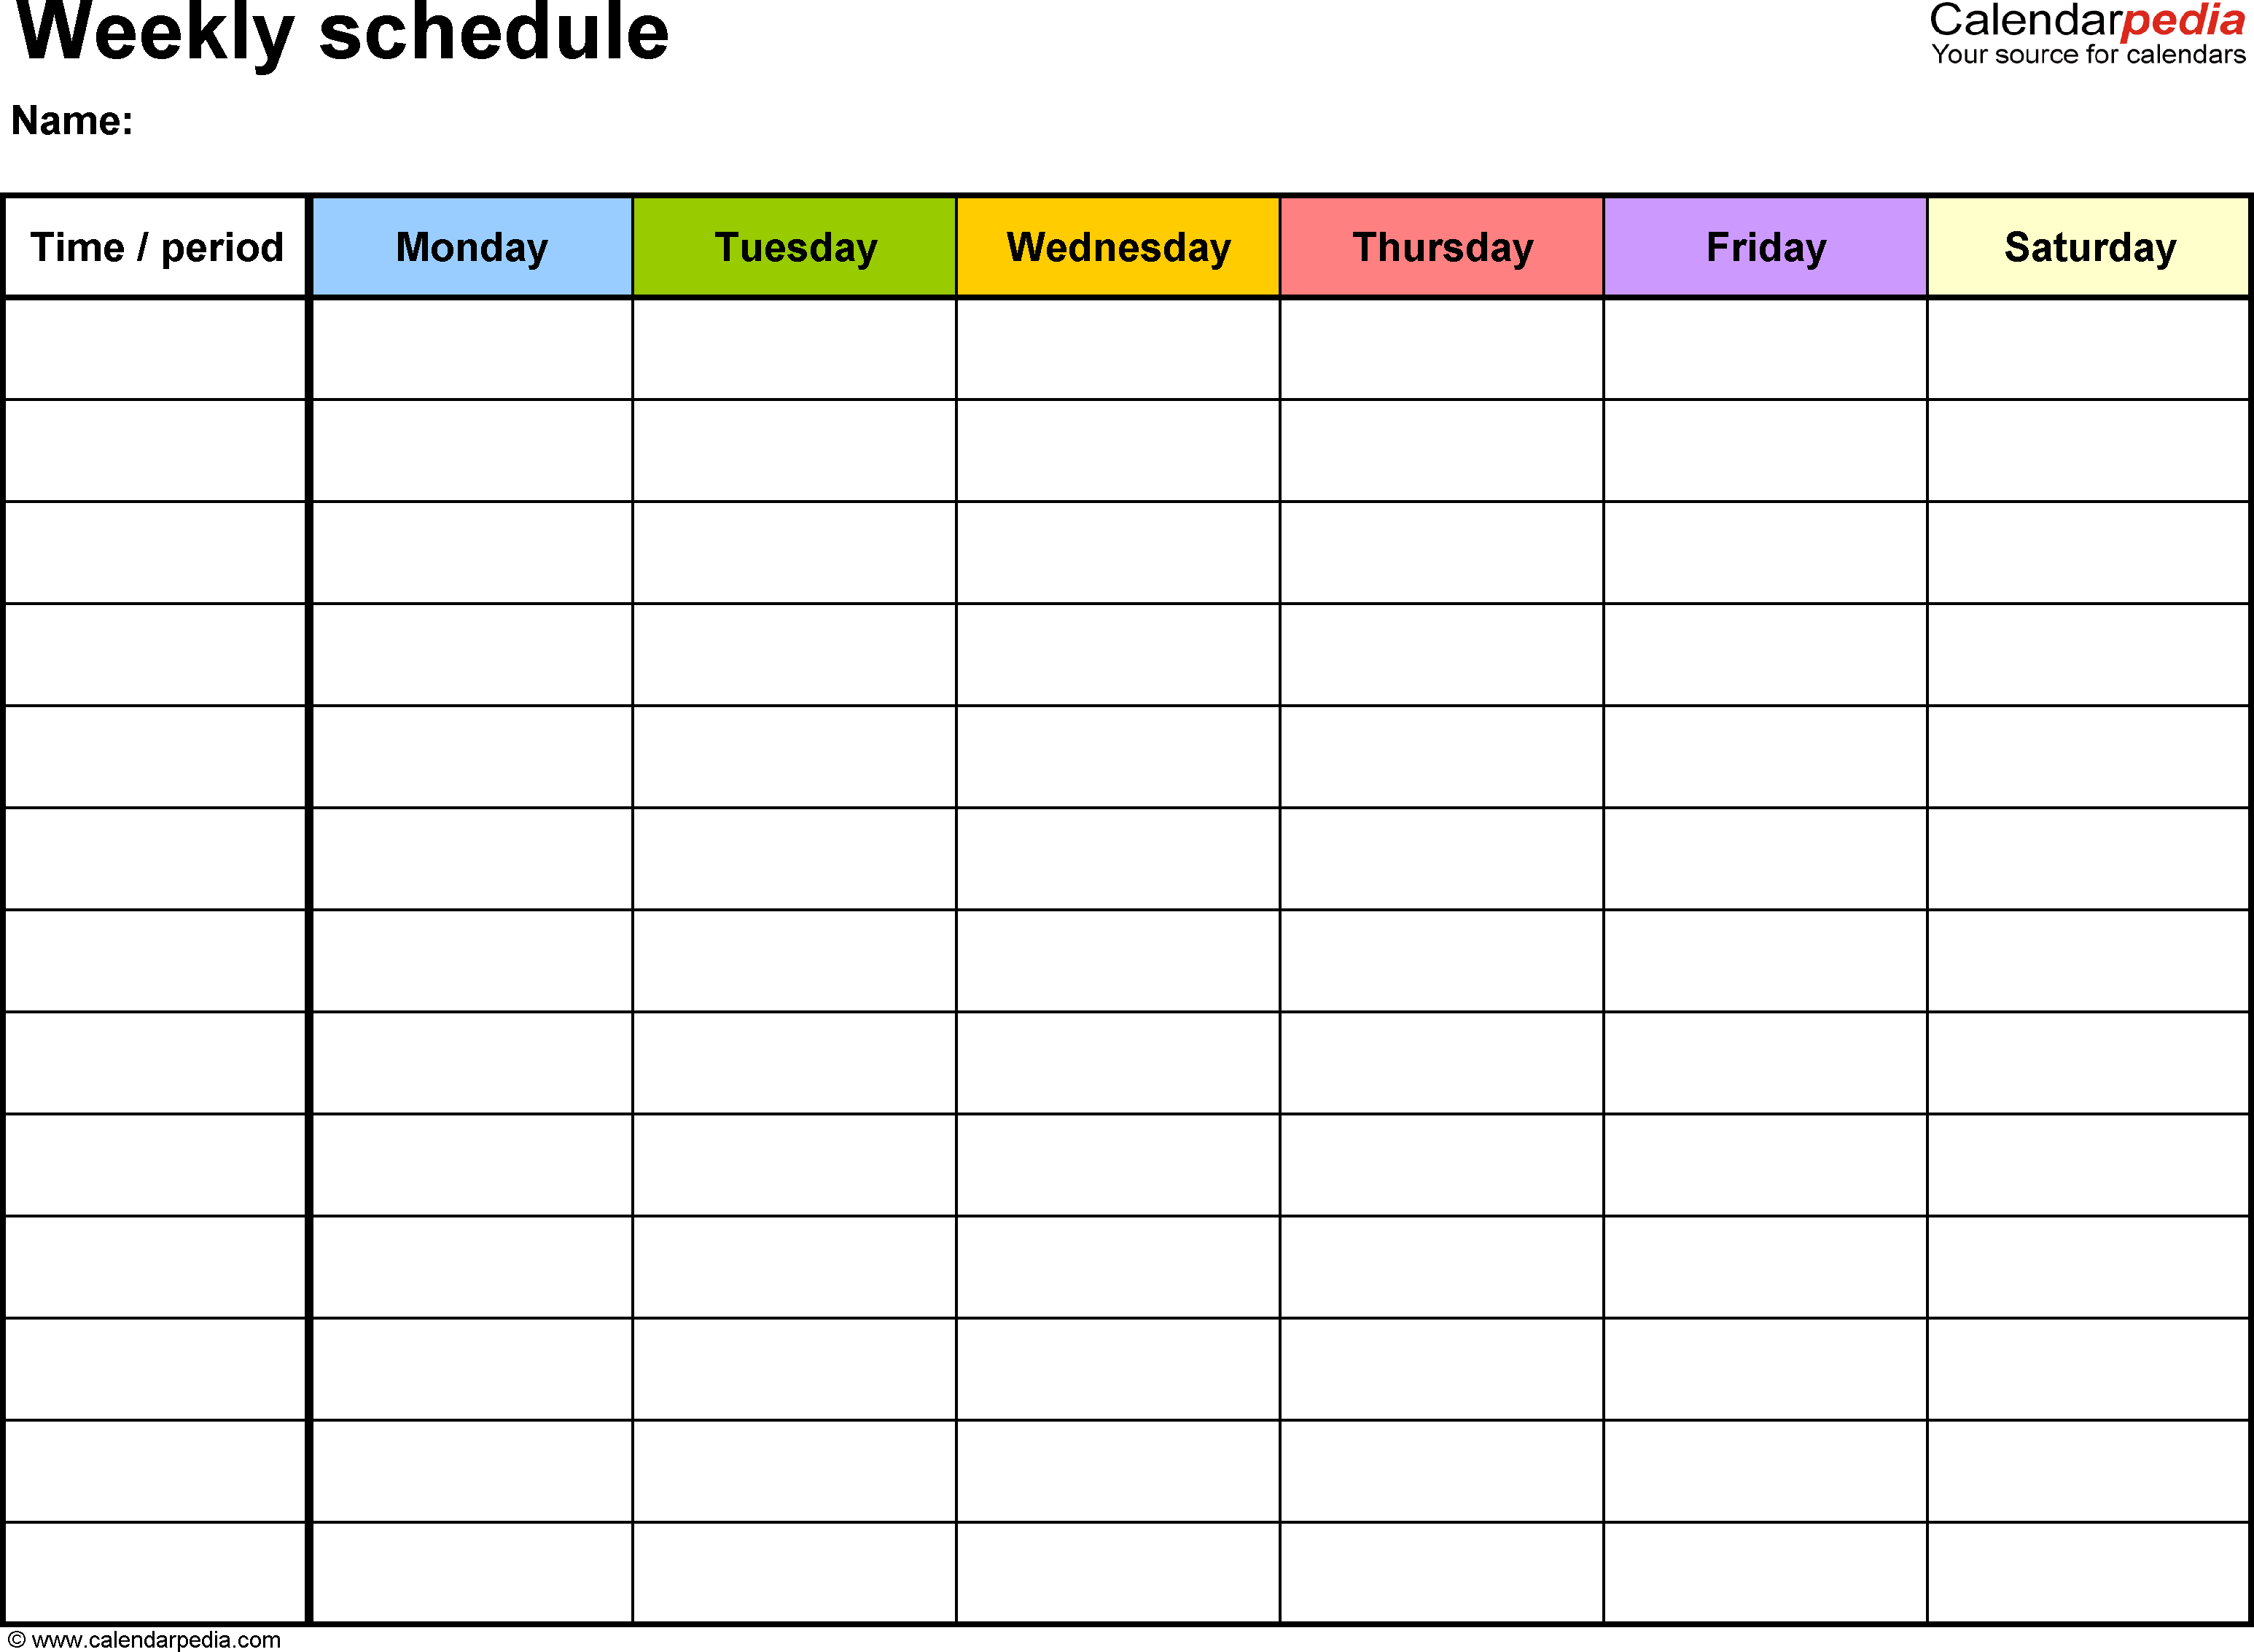 Weekly+Schedule+Template | Weekly Calendar Template intended for Printable Weekly Calendar With Time Slots